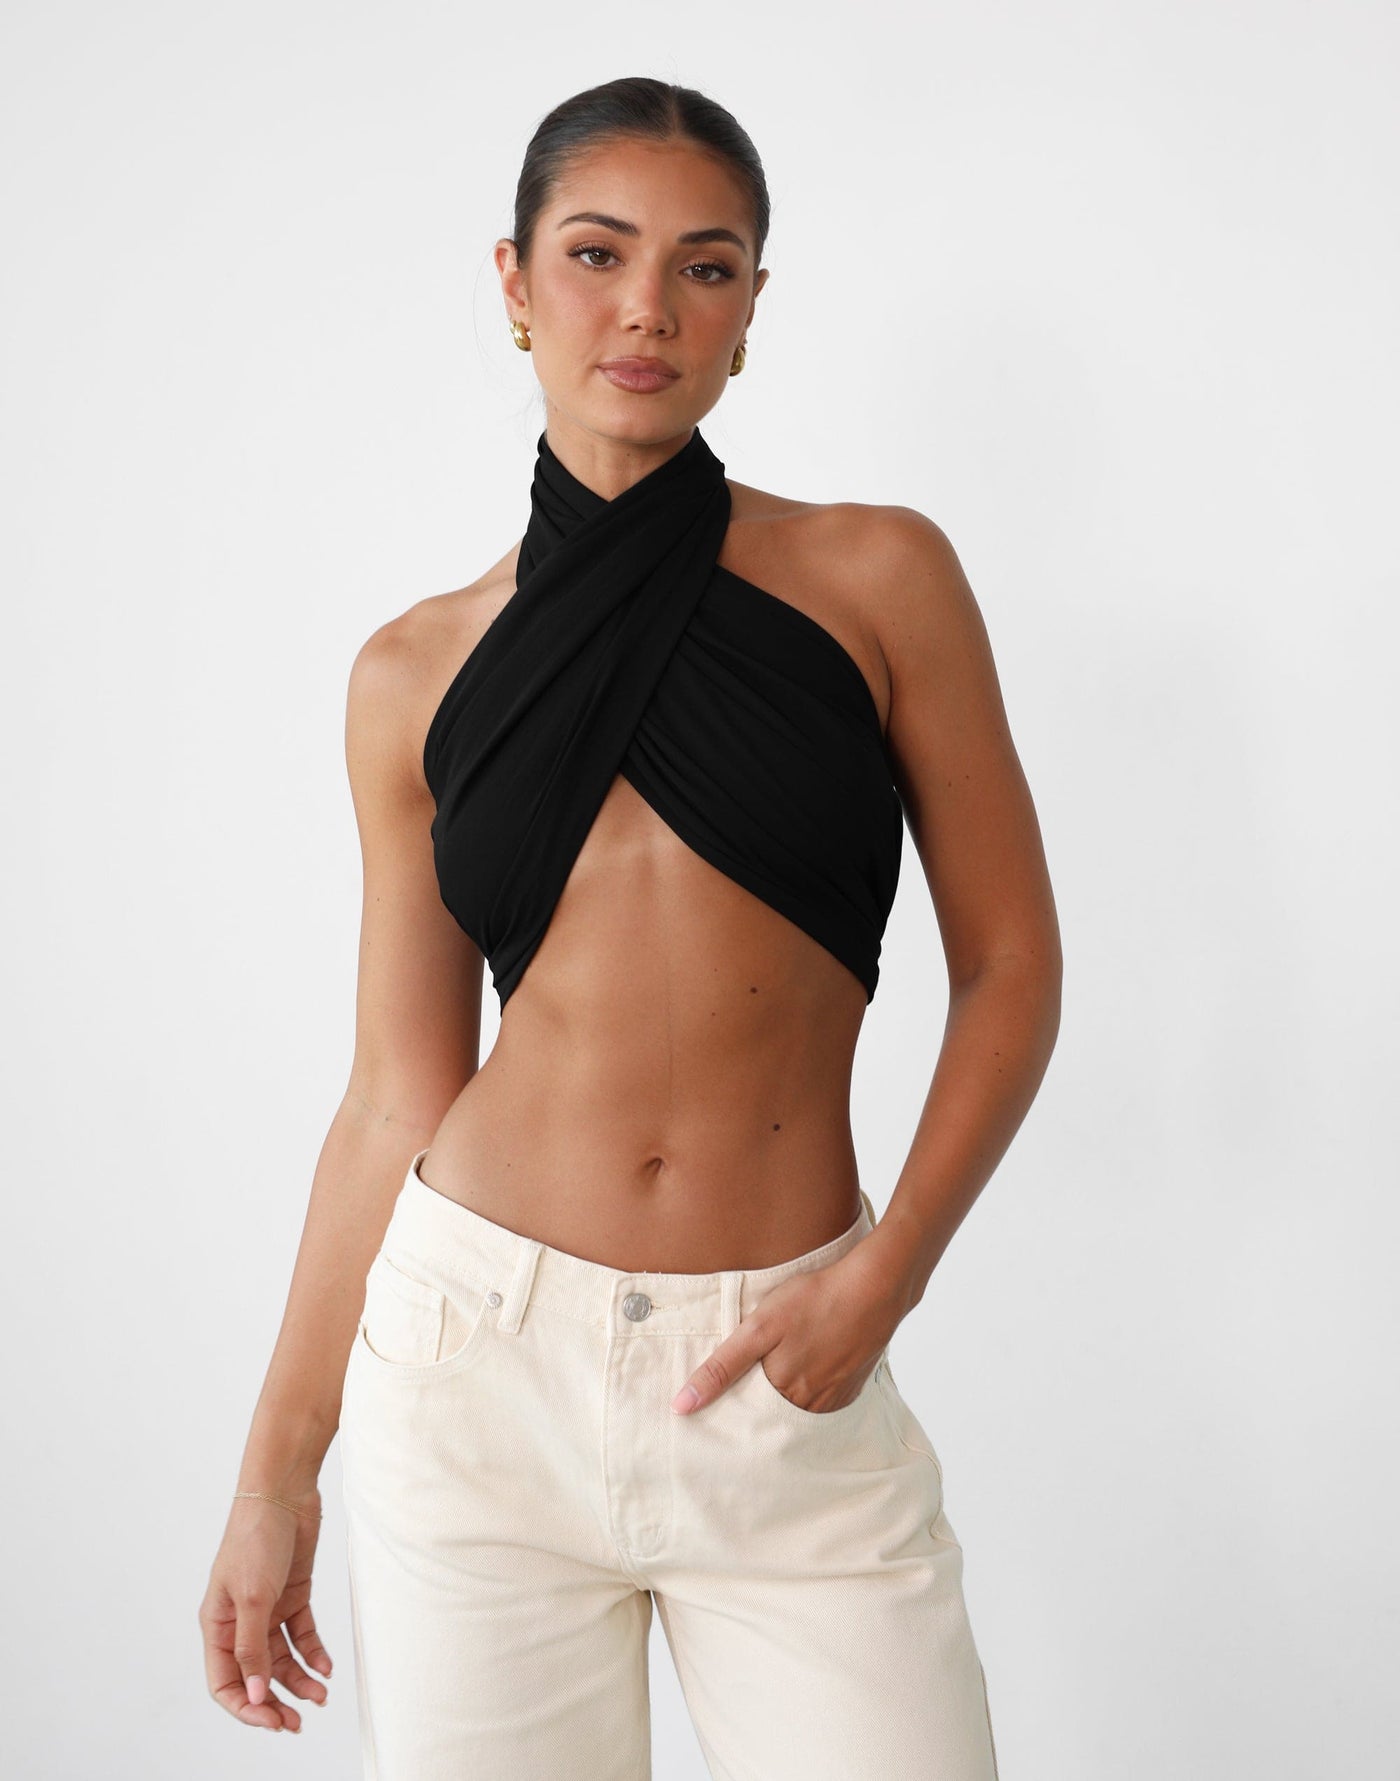 Eleanor Scarf (Black) - Loose Tie Scarf Accessory - Women's Accessories - Charcoal Clothing